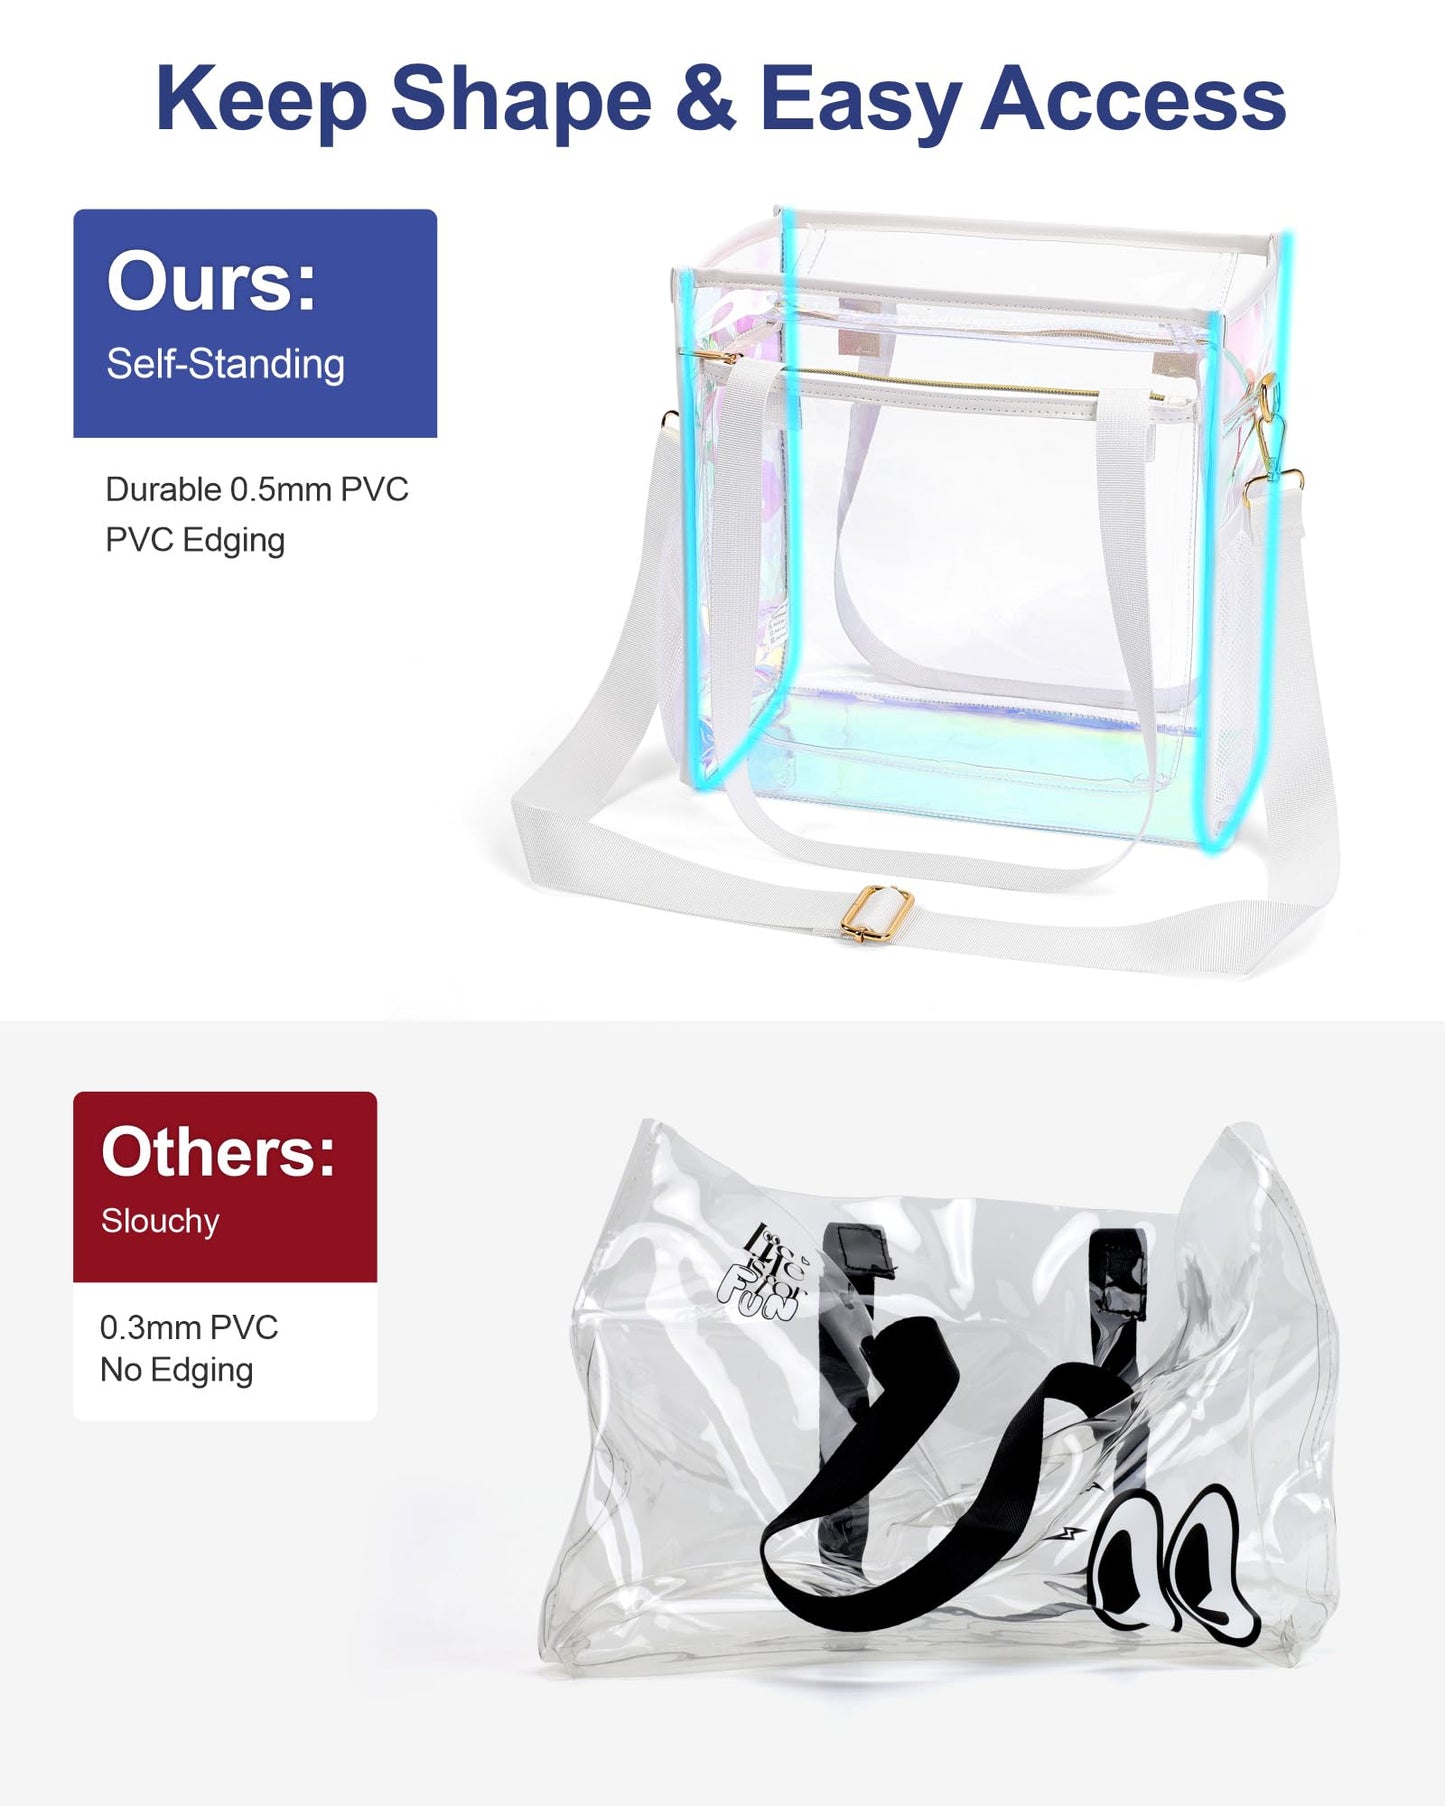 PACKISM Holographic Clear Tote Bag Stadium Approved for Women